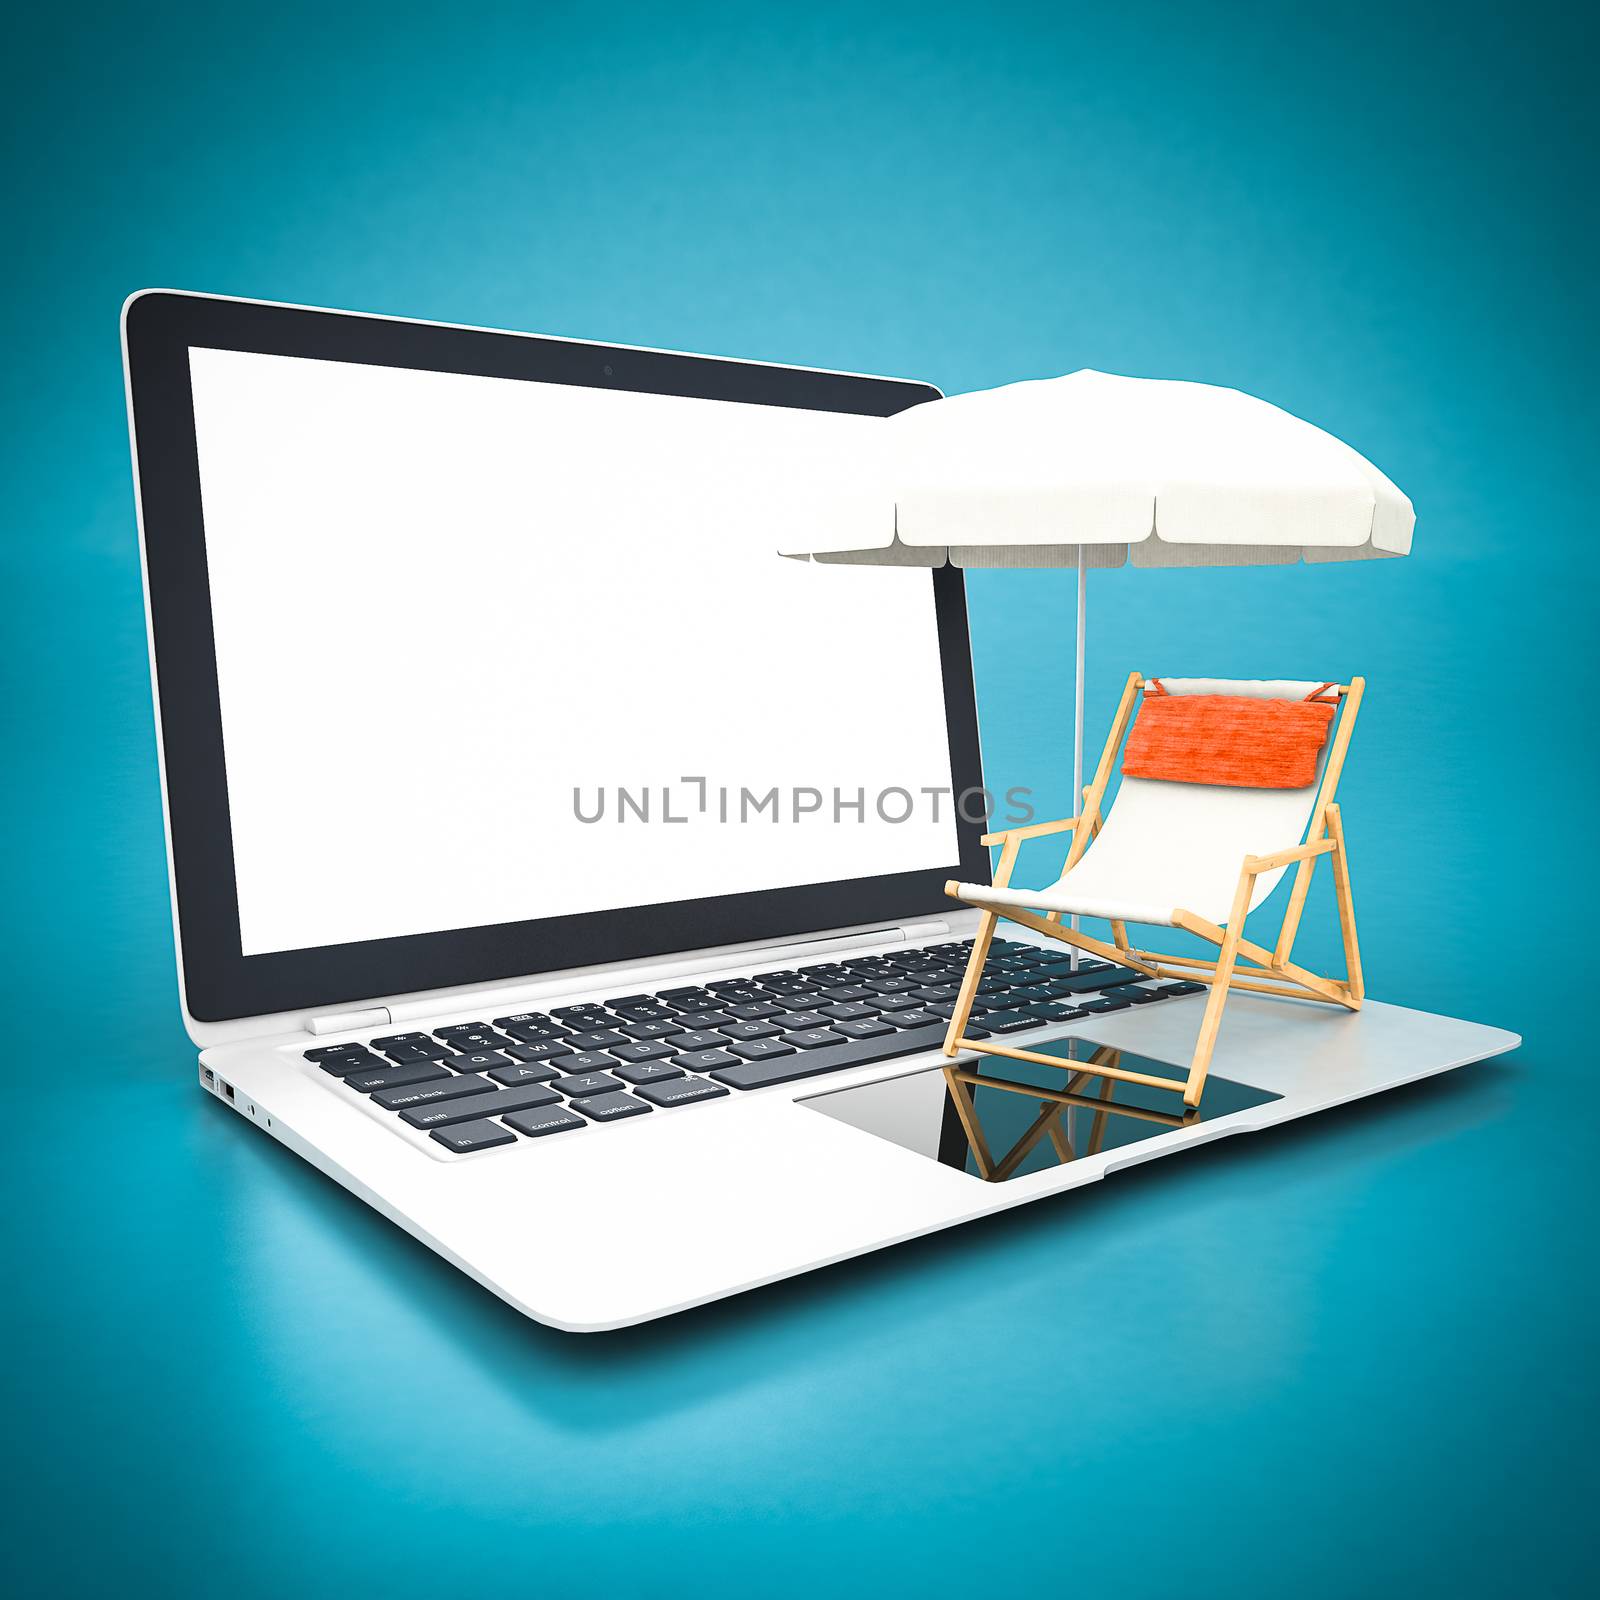 Beach chair and umbrella and white laptop on a blue background